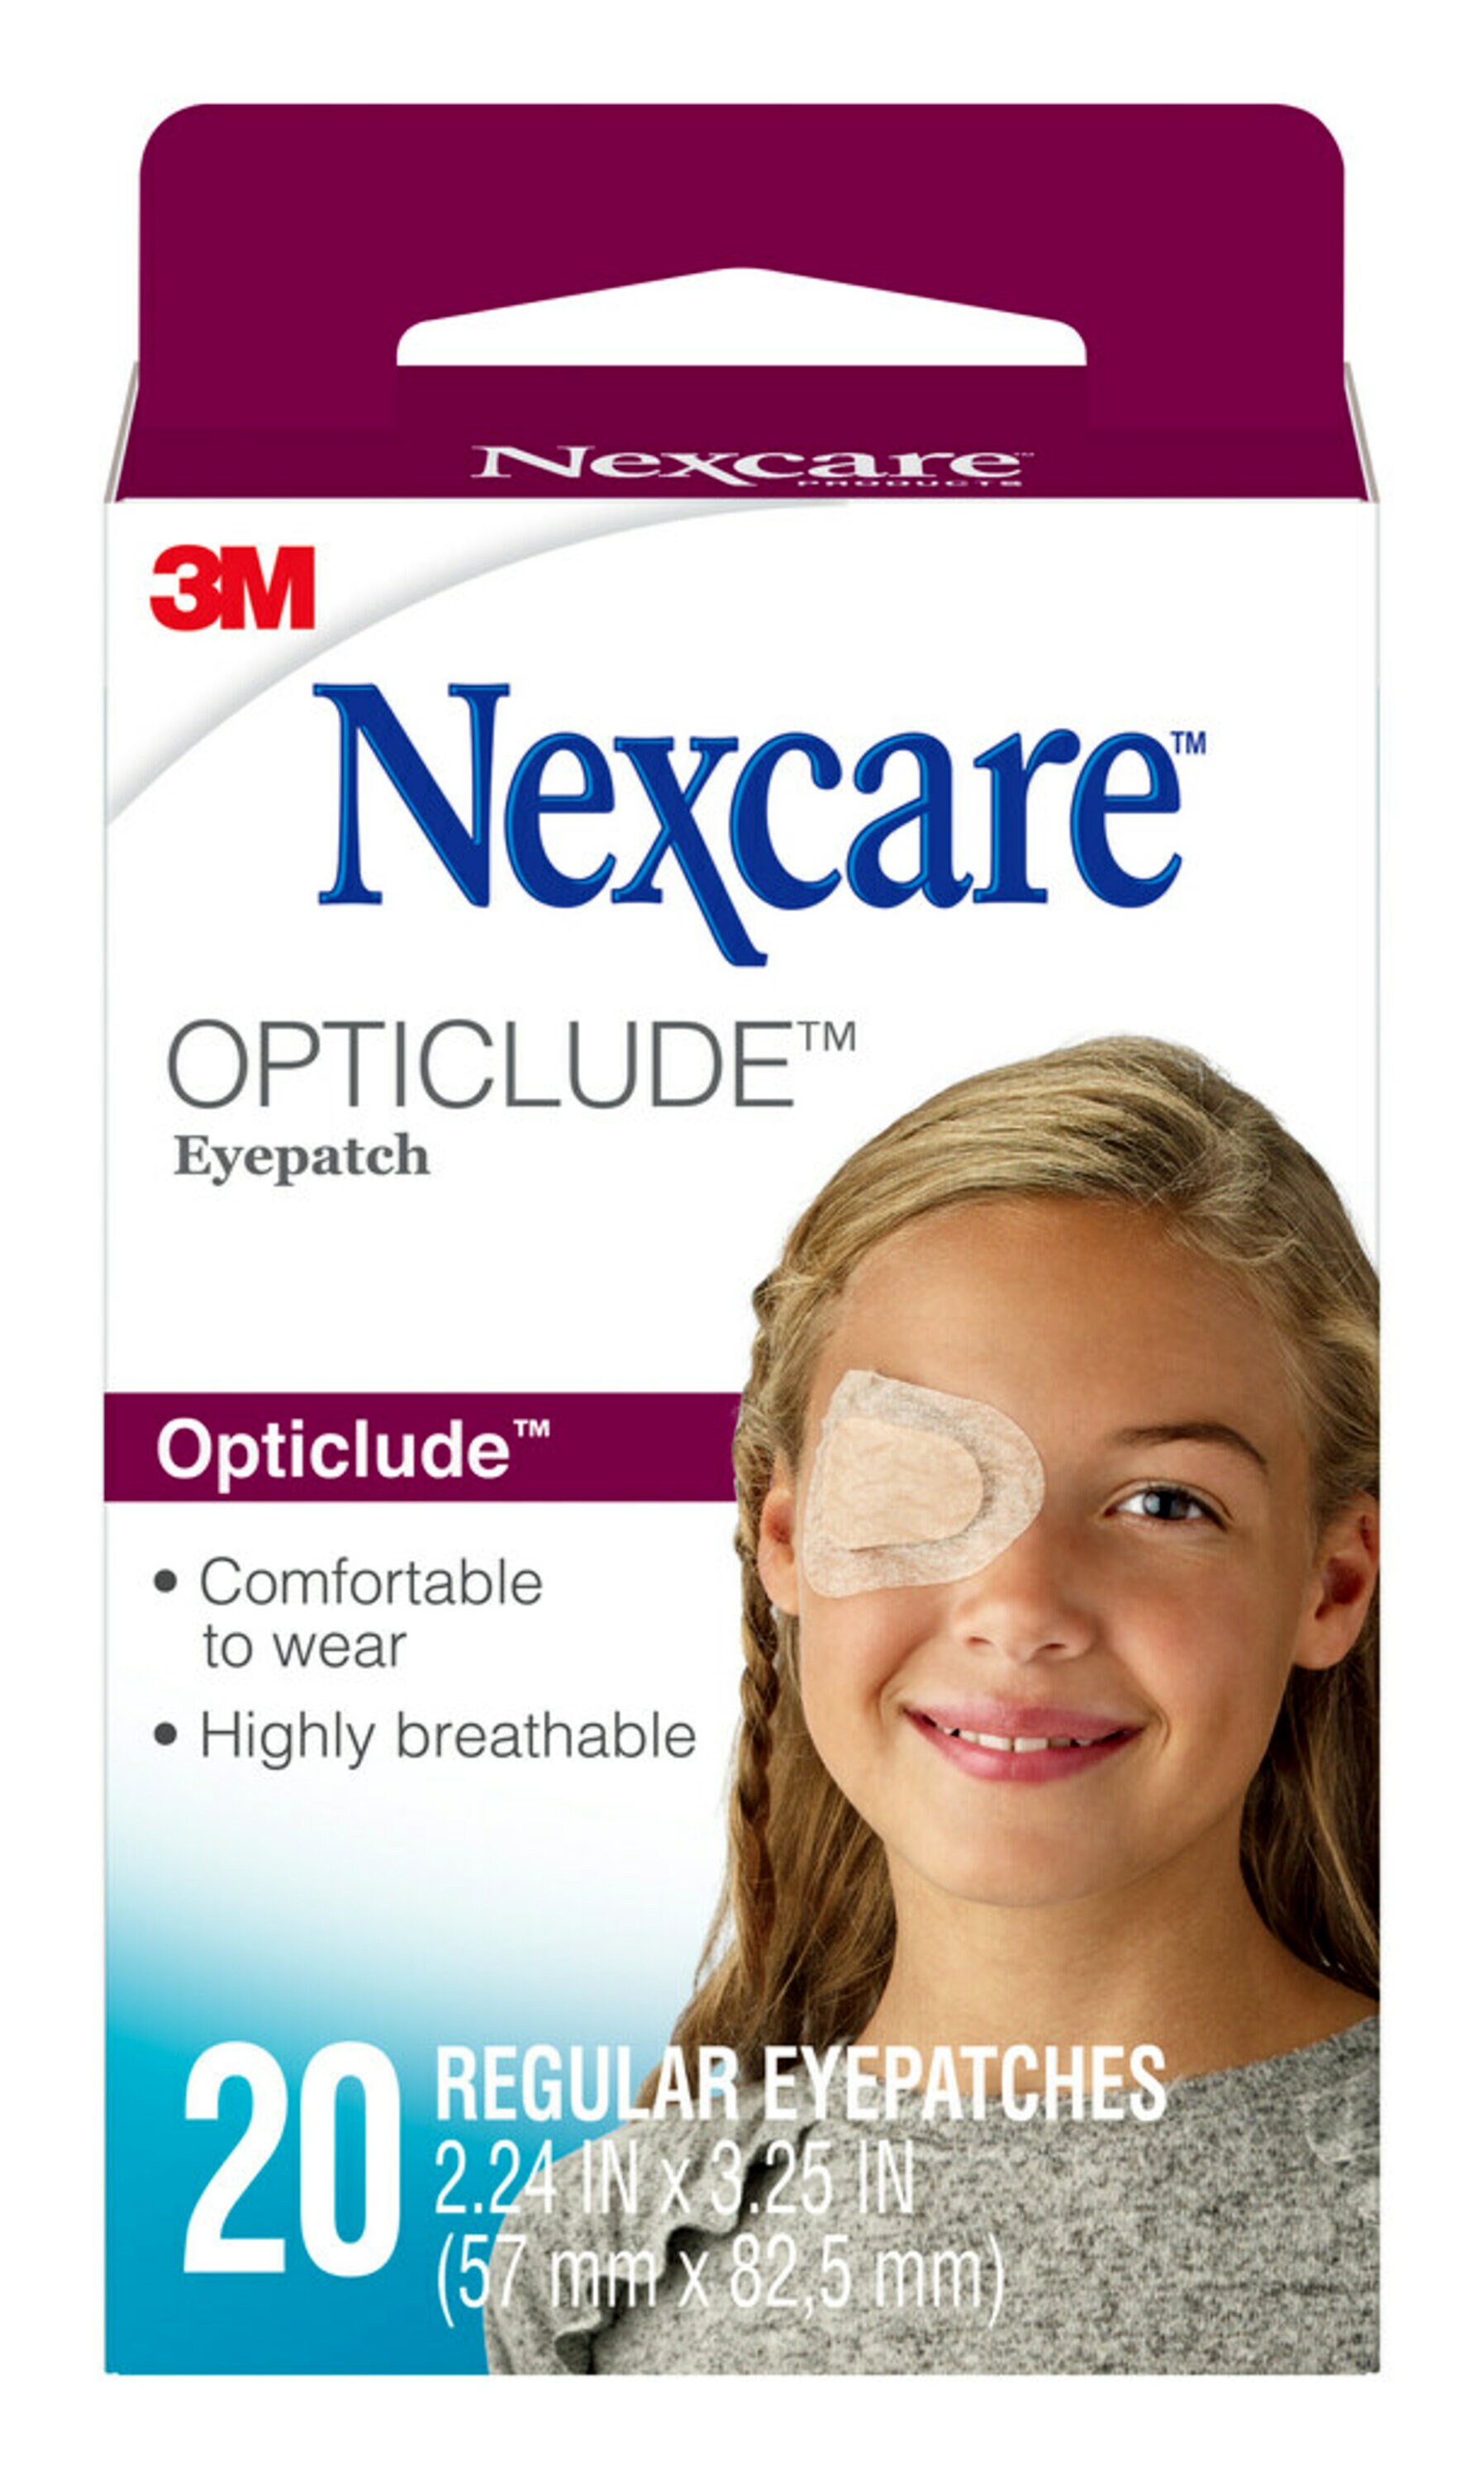 Nexcare Opticlude Comfort Eye Patch, Nude, Breathable, 20 Count - image 1 of 7